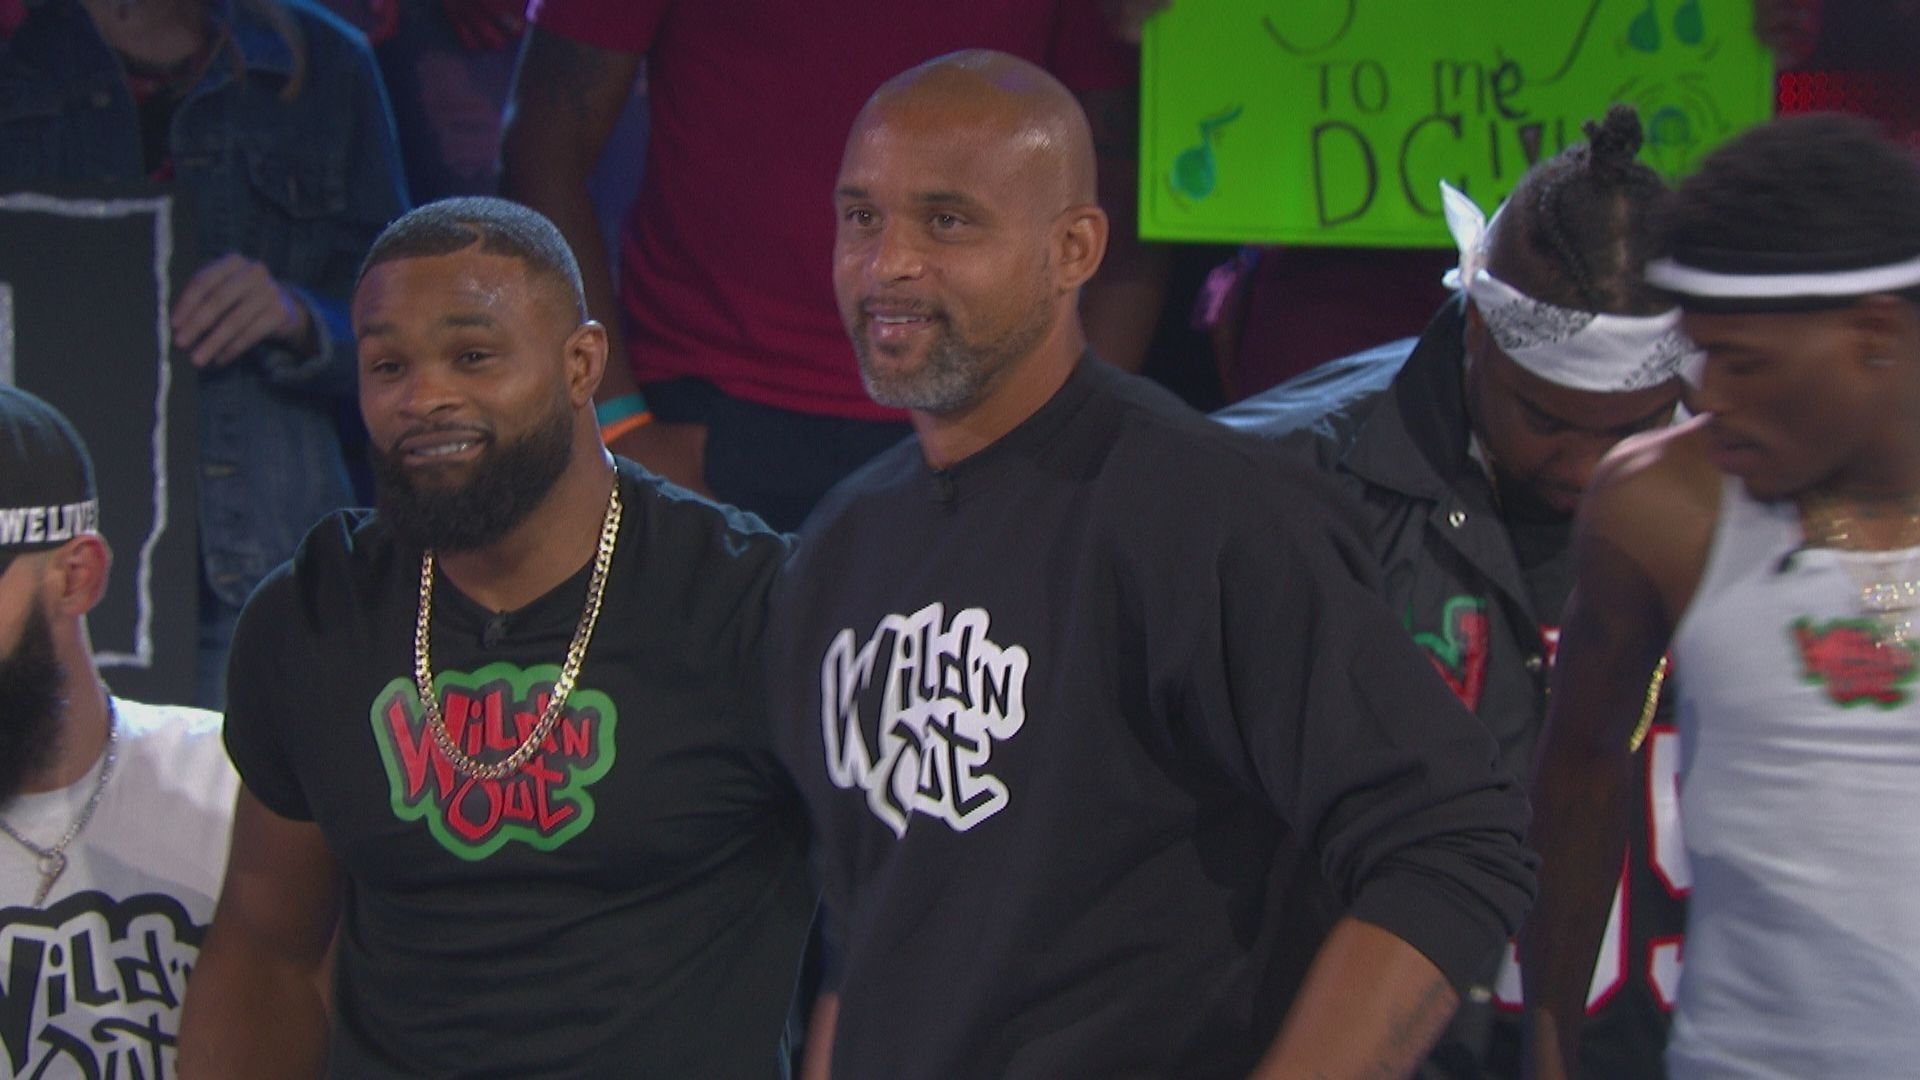 Wild 'N Out background